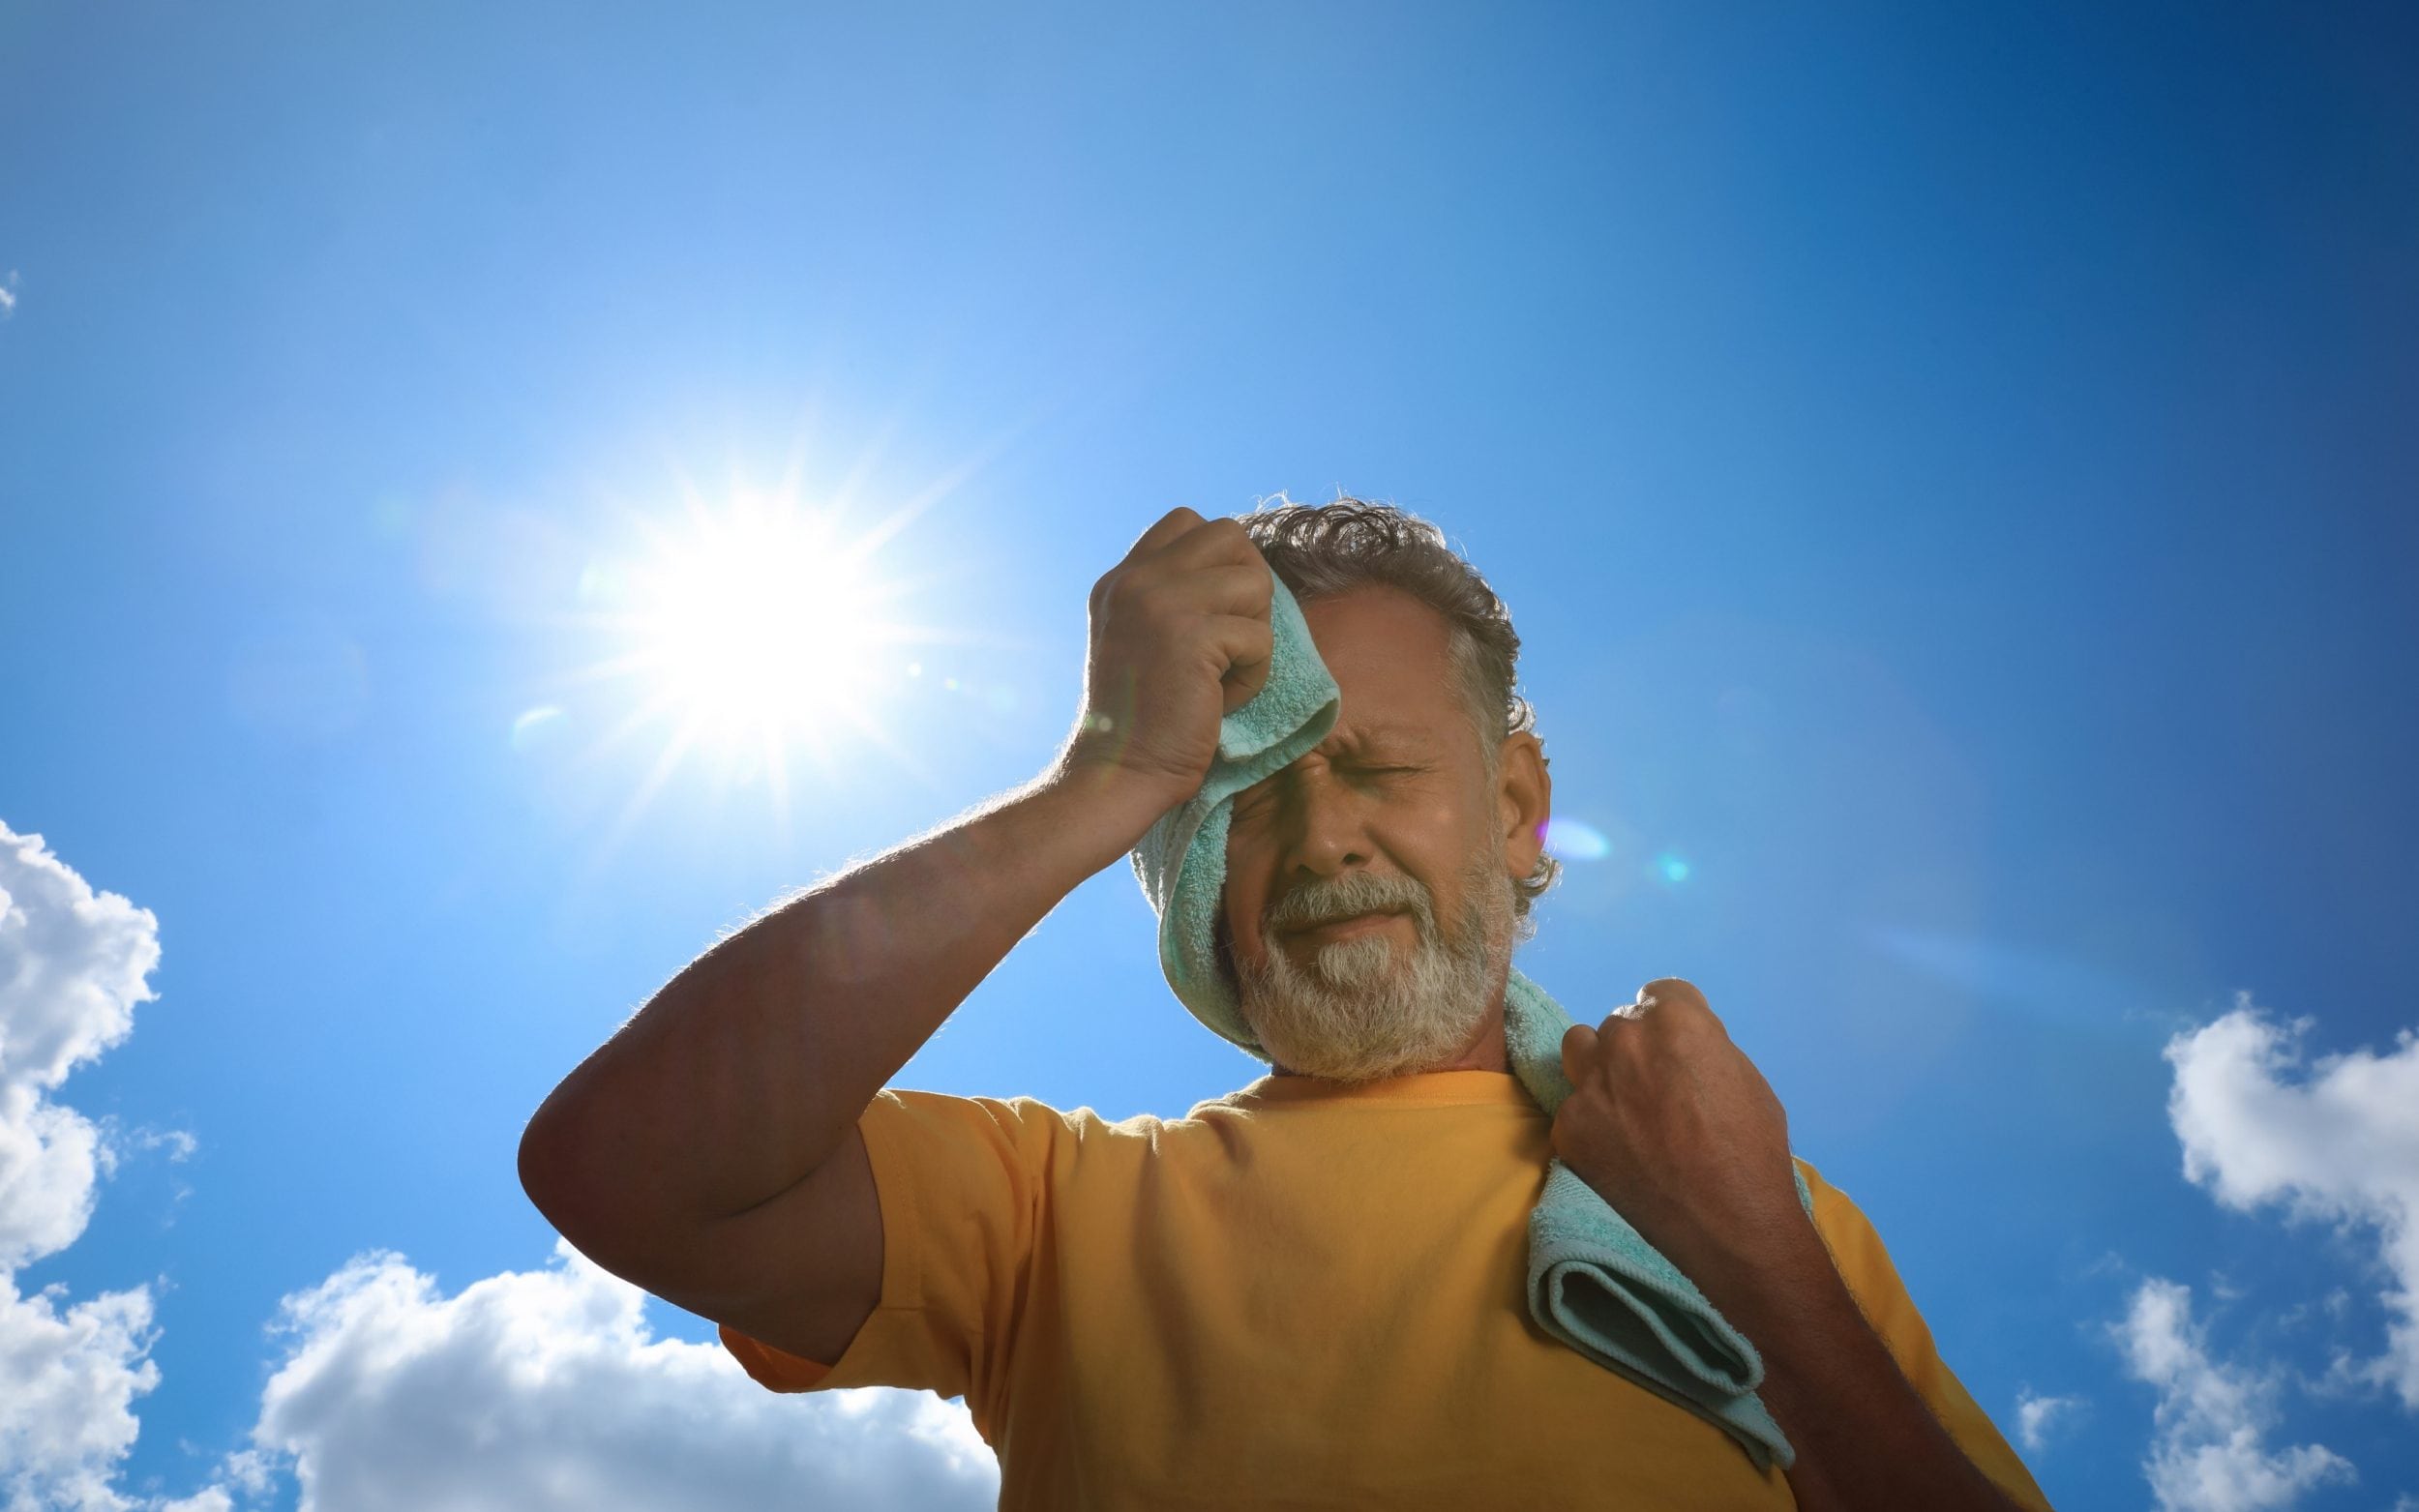 how to, signs of heatstroke: symptoms, treatment and how to prevent it